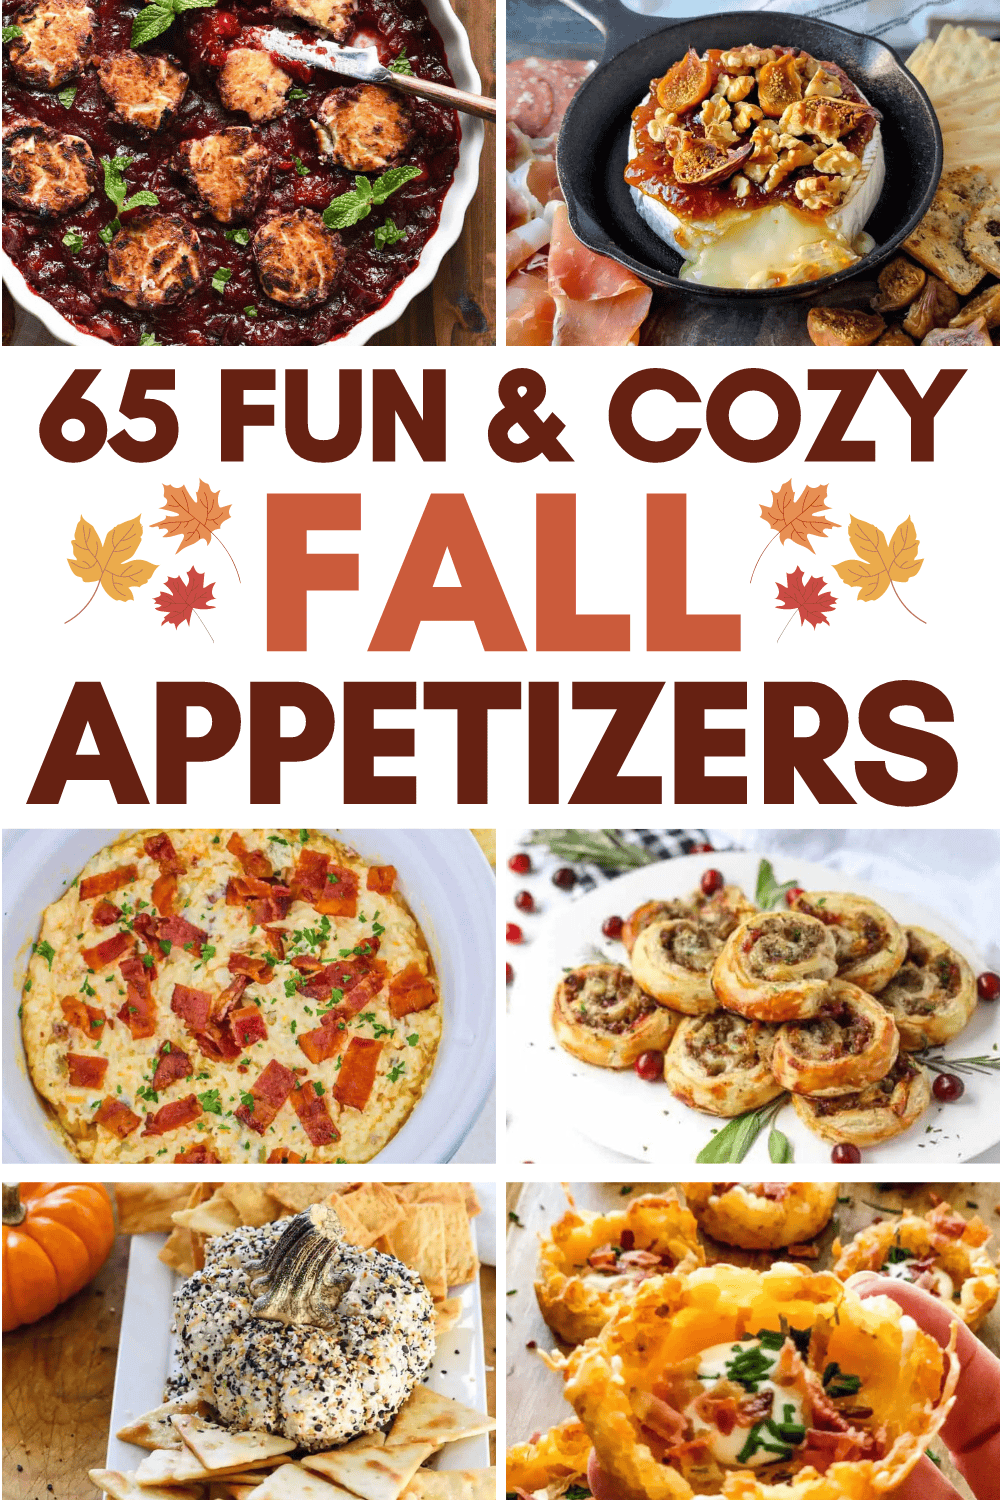 Easy fall party appetizers for a crowd! These yummy fall dips and appetizers include autumn appetizers in the crockpot, savory upscale appetizers with apple, brie, or pumpkin, healthy light appetizers from trader joes, finger foods, and no bake cold appetizers that travel well. Cozy fall appetizers are the best fall appetizers for parties, or fall wine night appetizers. Unique fall appetizers recipes, fall party food and snacks, make ahead fall dips for Thanksgiving, Halloween or dinner parties.